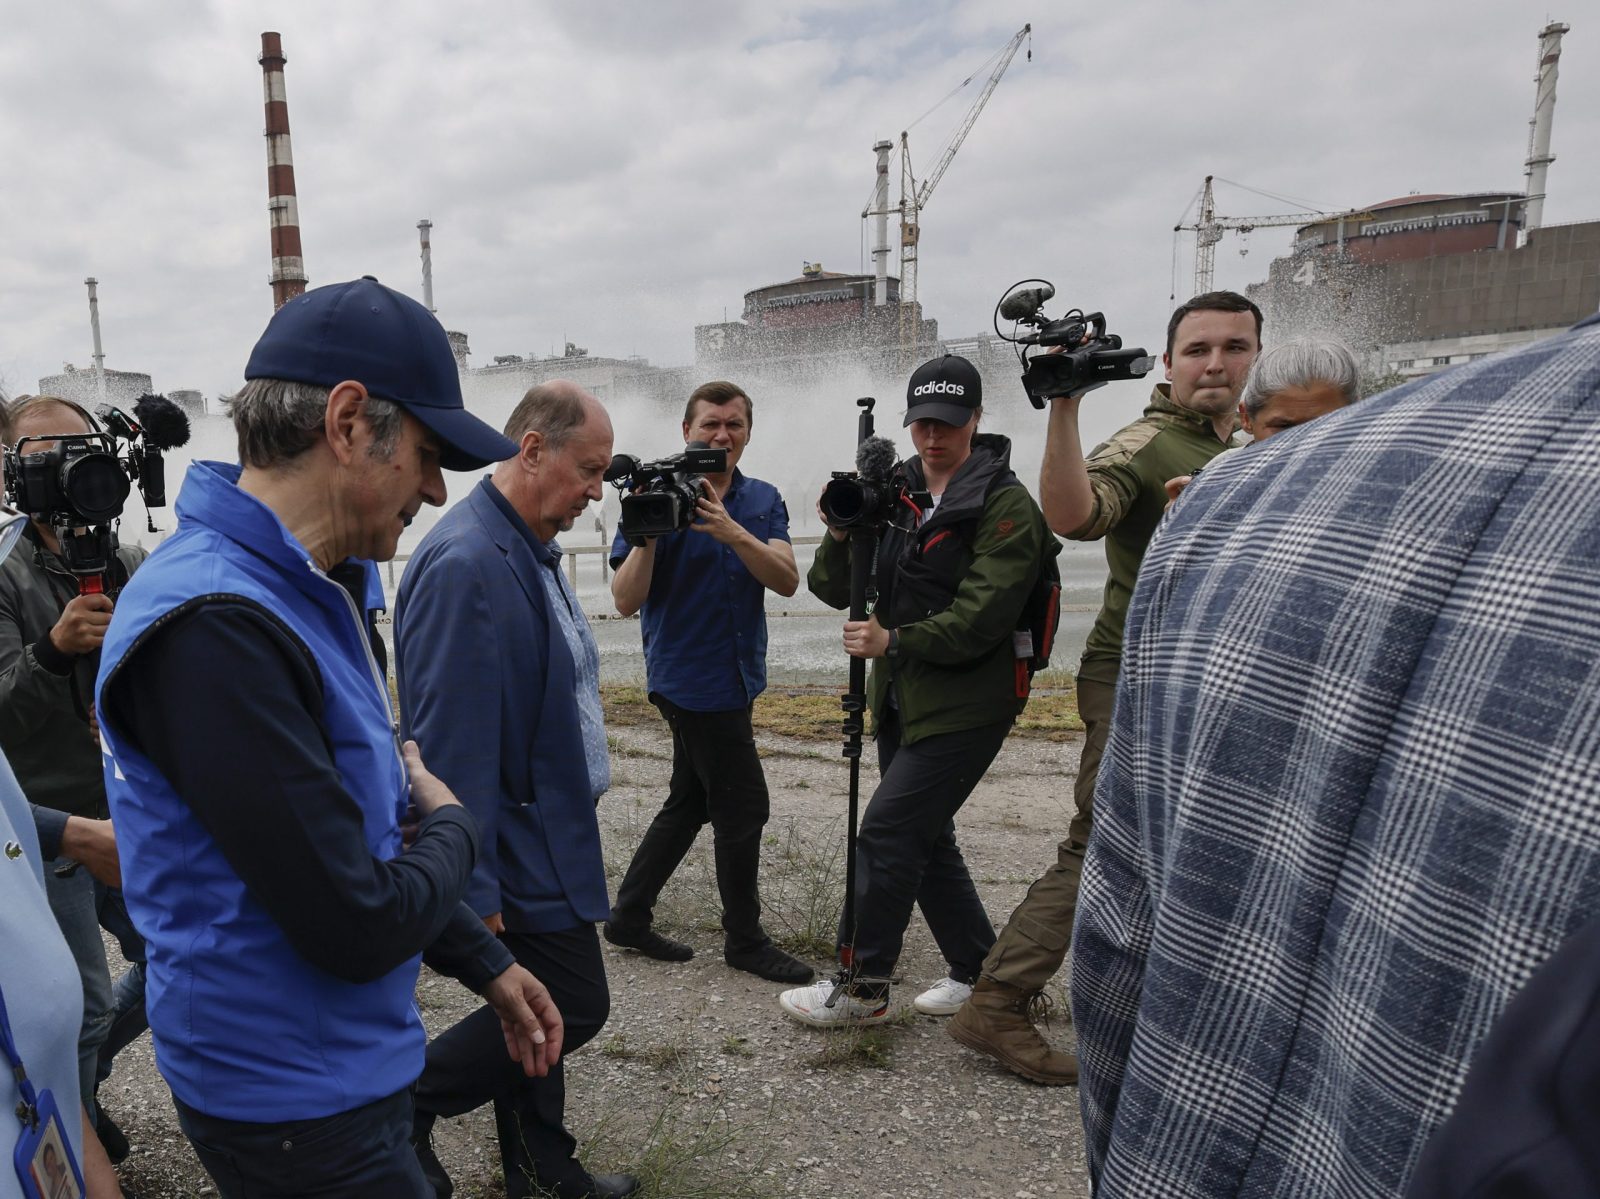 epa10692582 A picture taken during a visit to Enerhodar organised by the Russian Defence ministry shows International Atomic Energy Agency (IAEA) Director-General Rafael Mariano Grossi (L) examines the Zaporizhzhia Nuclear Power Plant in Enerhodar, southeastern Ukraine, 15 June 2023. The Zaporizhzhia Nuclear Power Plant can still continue to draw water from the Kakhovka reservoir, the IAEA reports. Grossi said that after the destruction of the Kakhovka hydroelectric power station, a situation may arise when the water from the Kakhovka reservoir will not be enough to cool the reactors of the Zaporozhye nuclear power plant. According to him, in this case, the reactors can be damaged, which threatens with the onset of radiological consequences. The water level in the reservoir near the Zaporizhzhya TPP has dropped to 11.27 meters and continues to decline.  EPA/SERGEI ILNITSKY